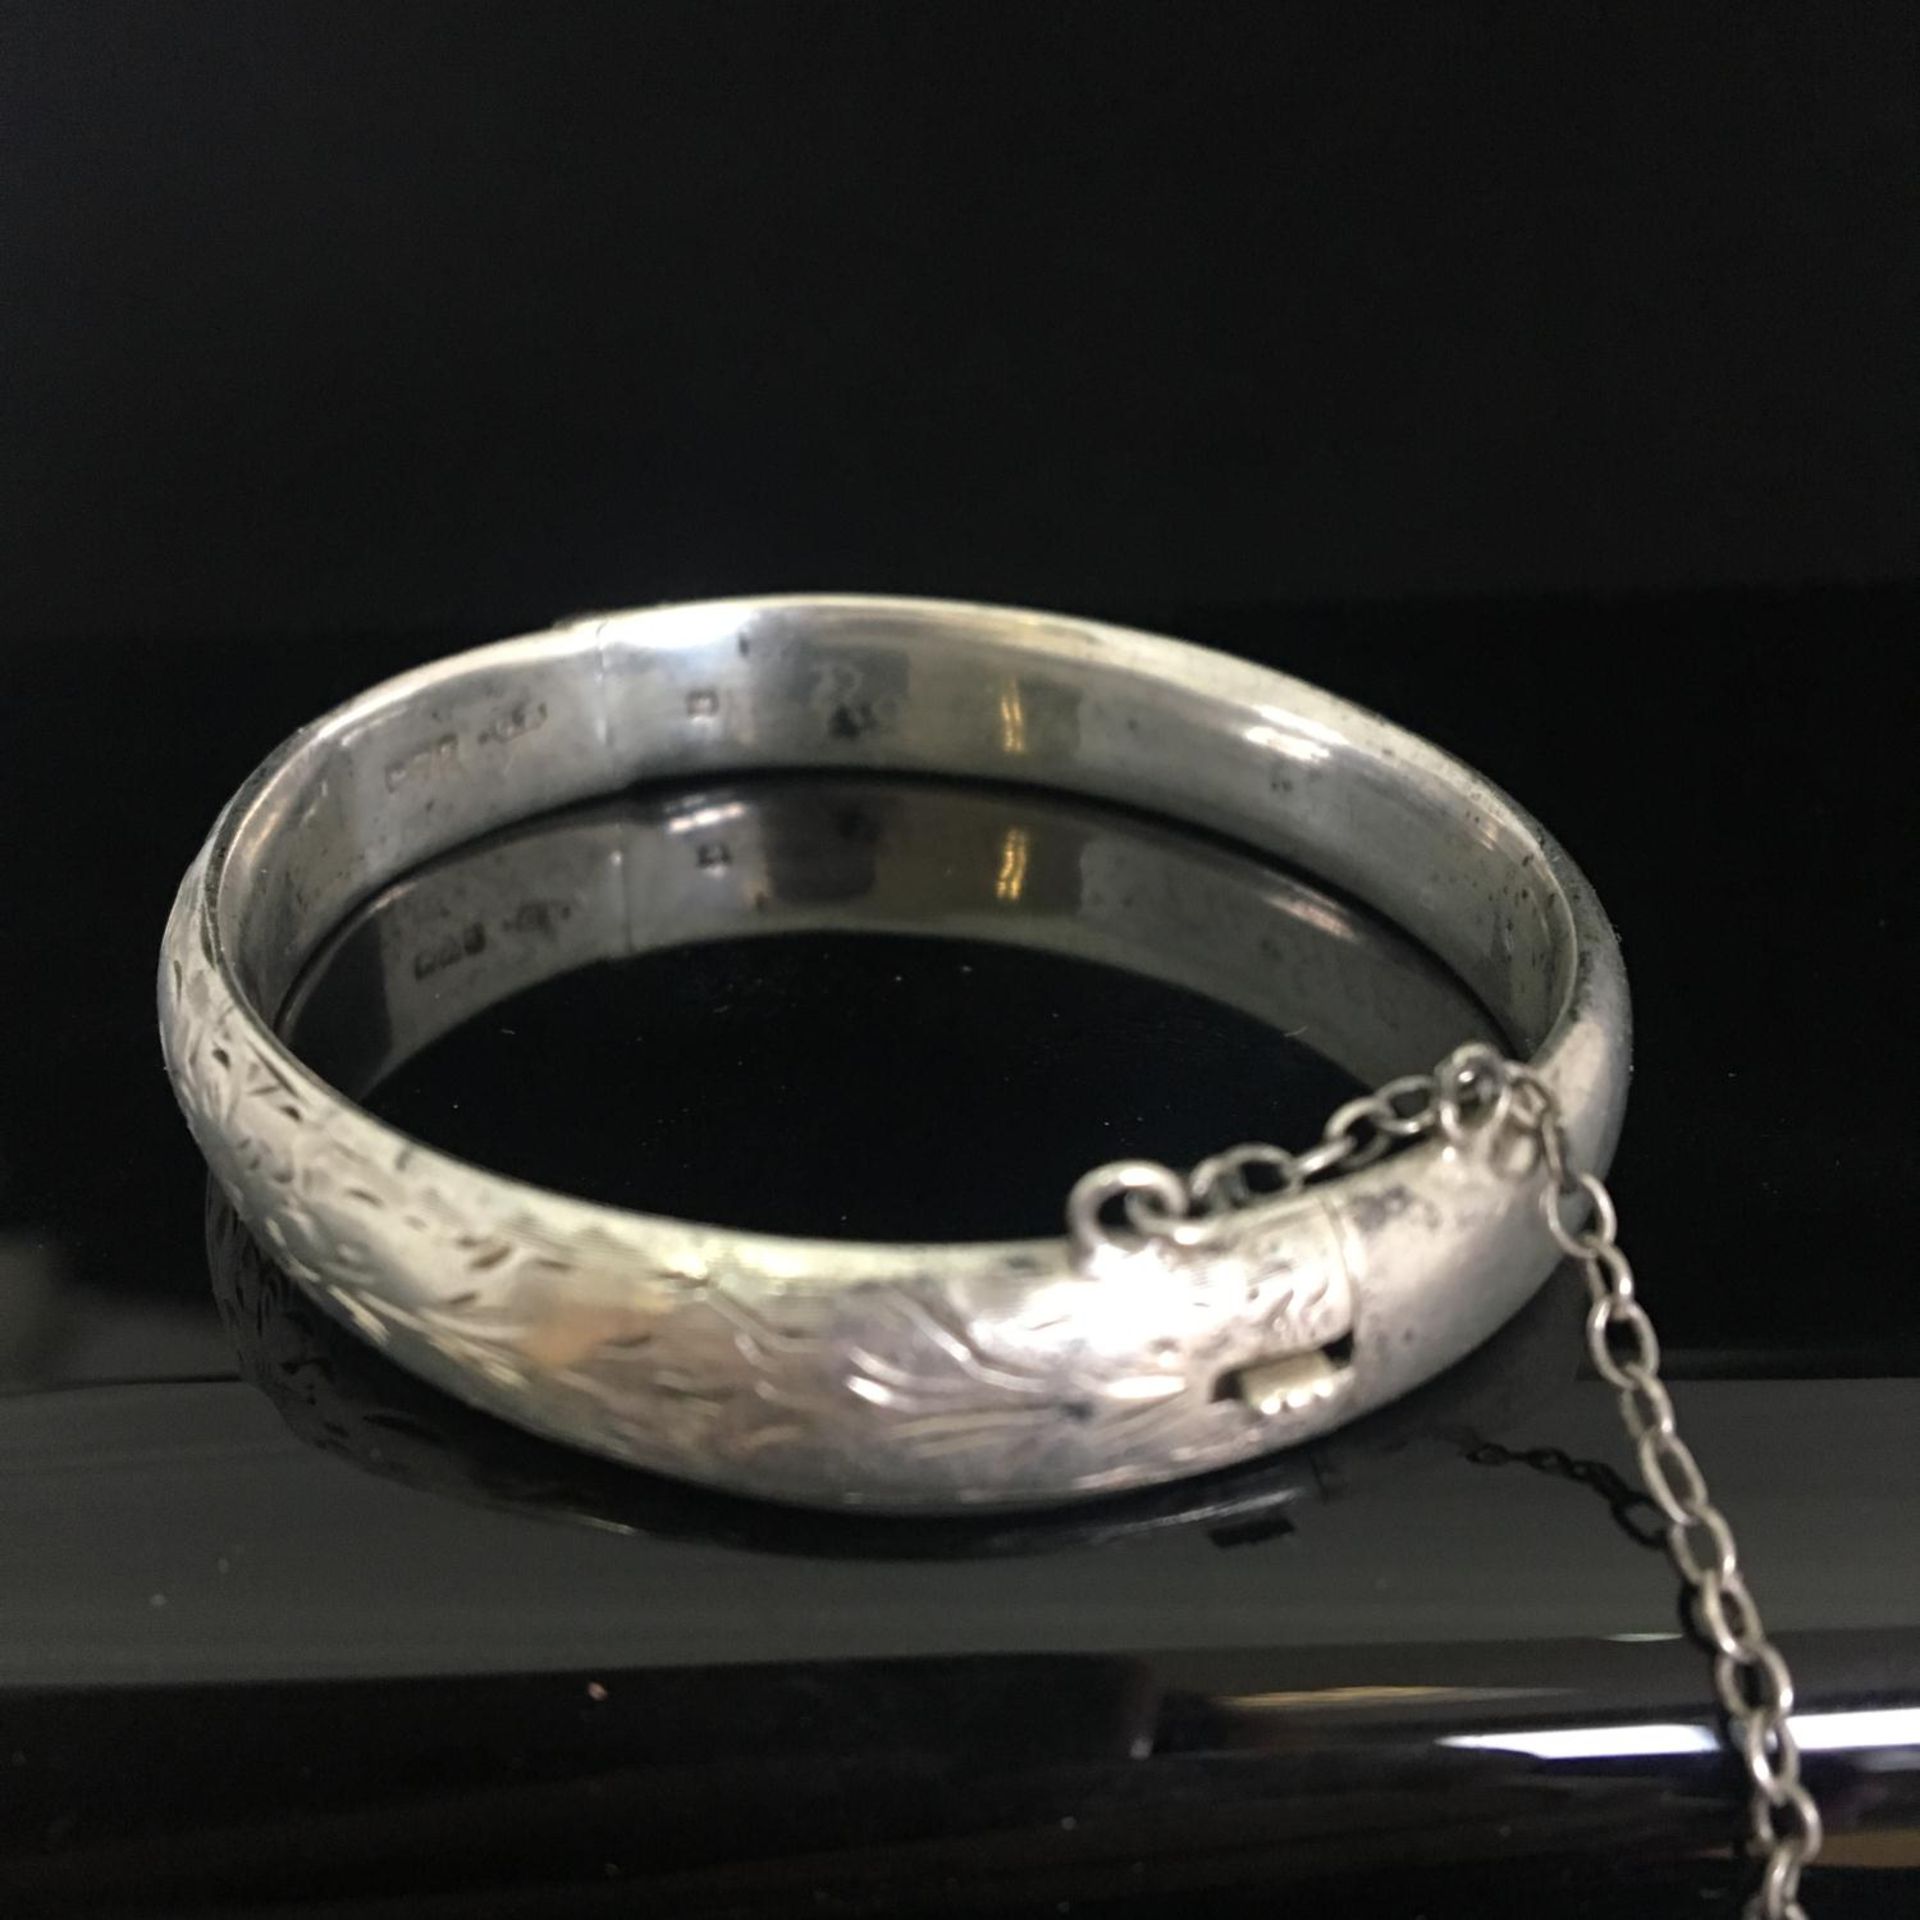 Arts and Crafts era hallmarked silver hinged bangle by Charles Horner c1919. Chester hallmarks. 8.